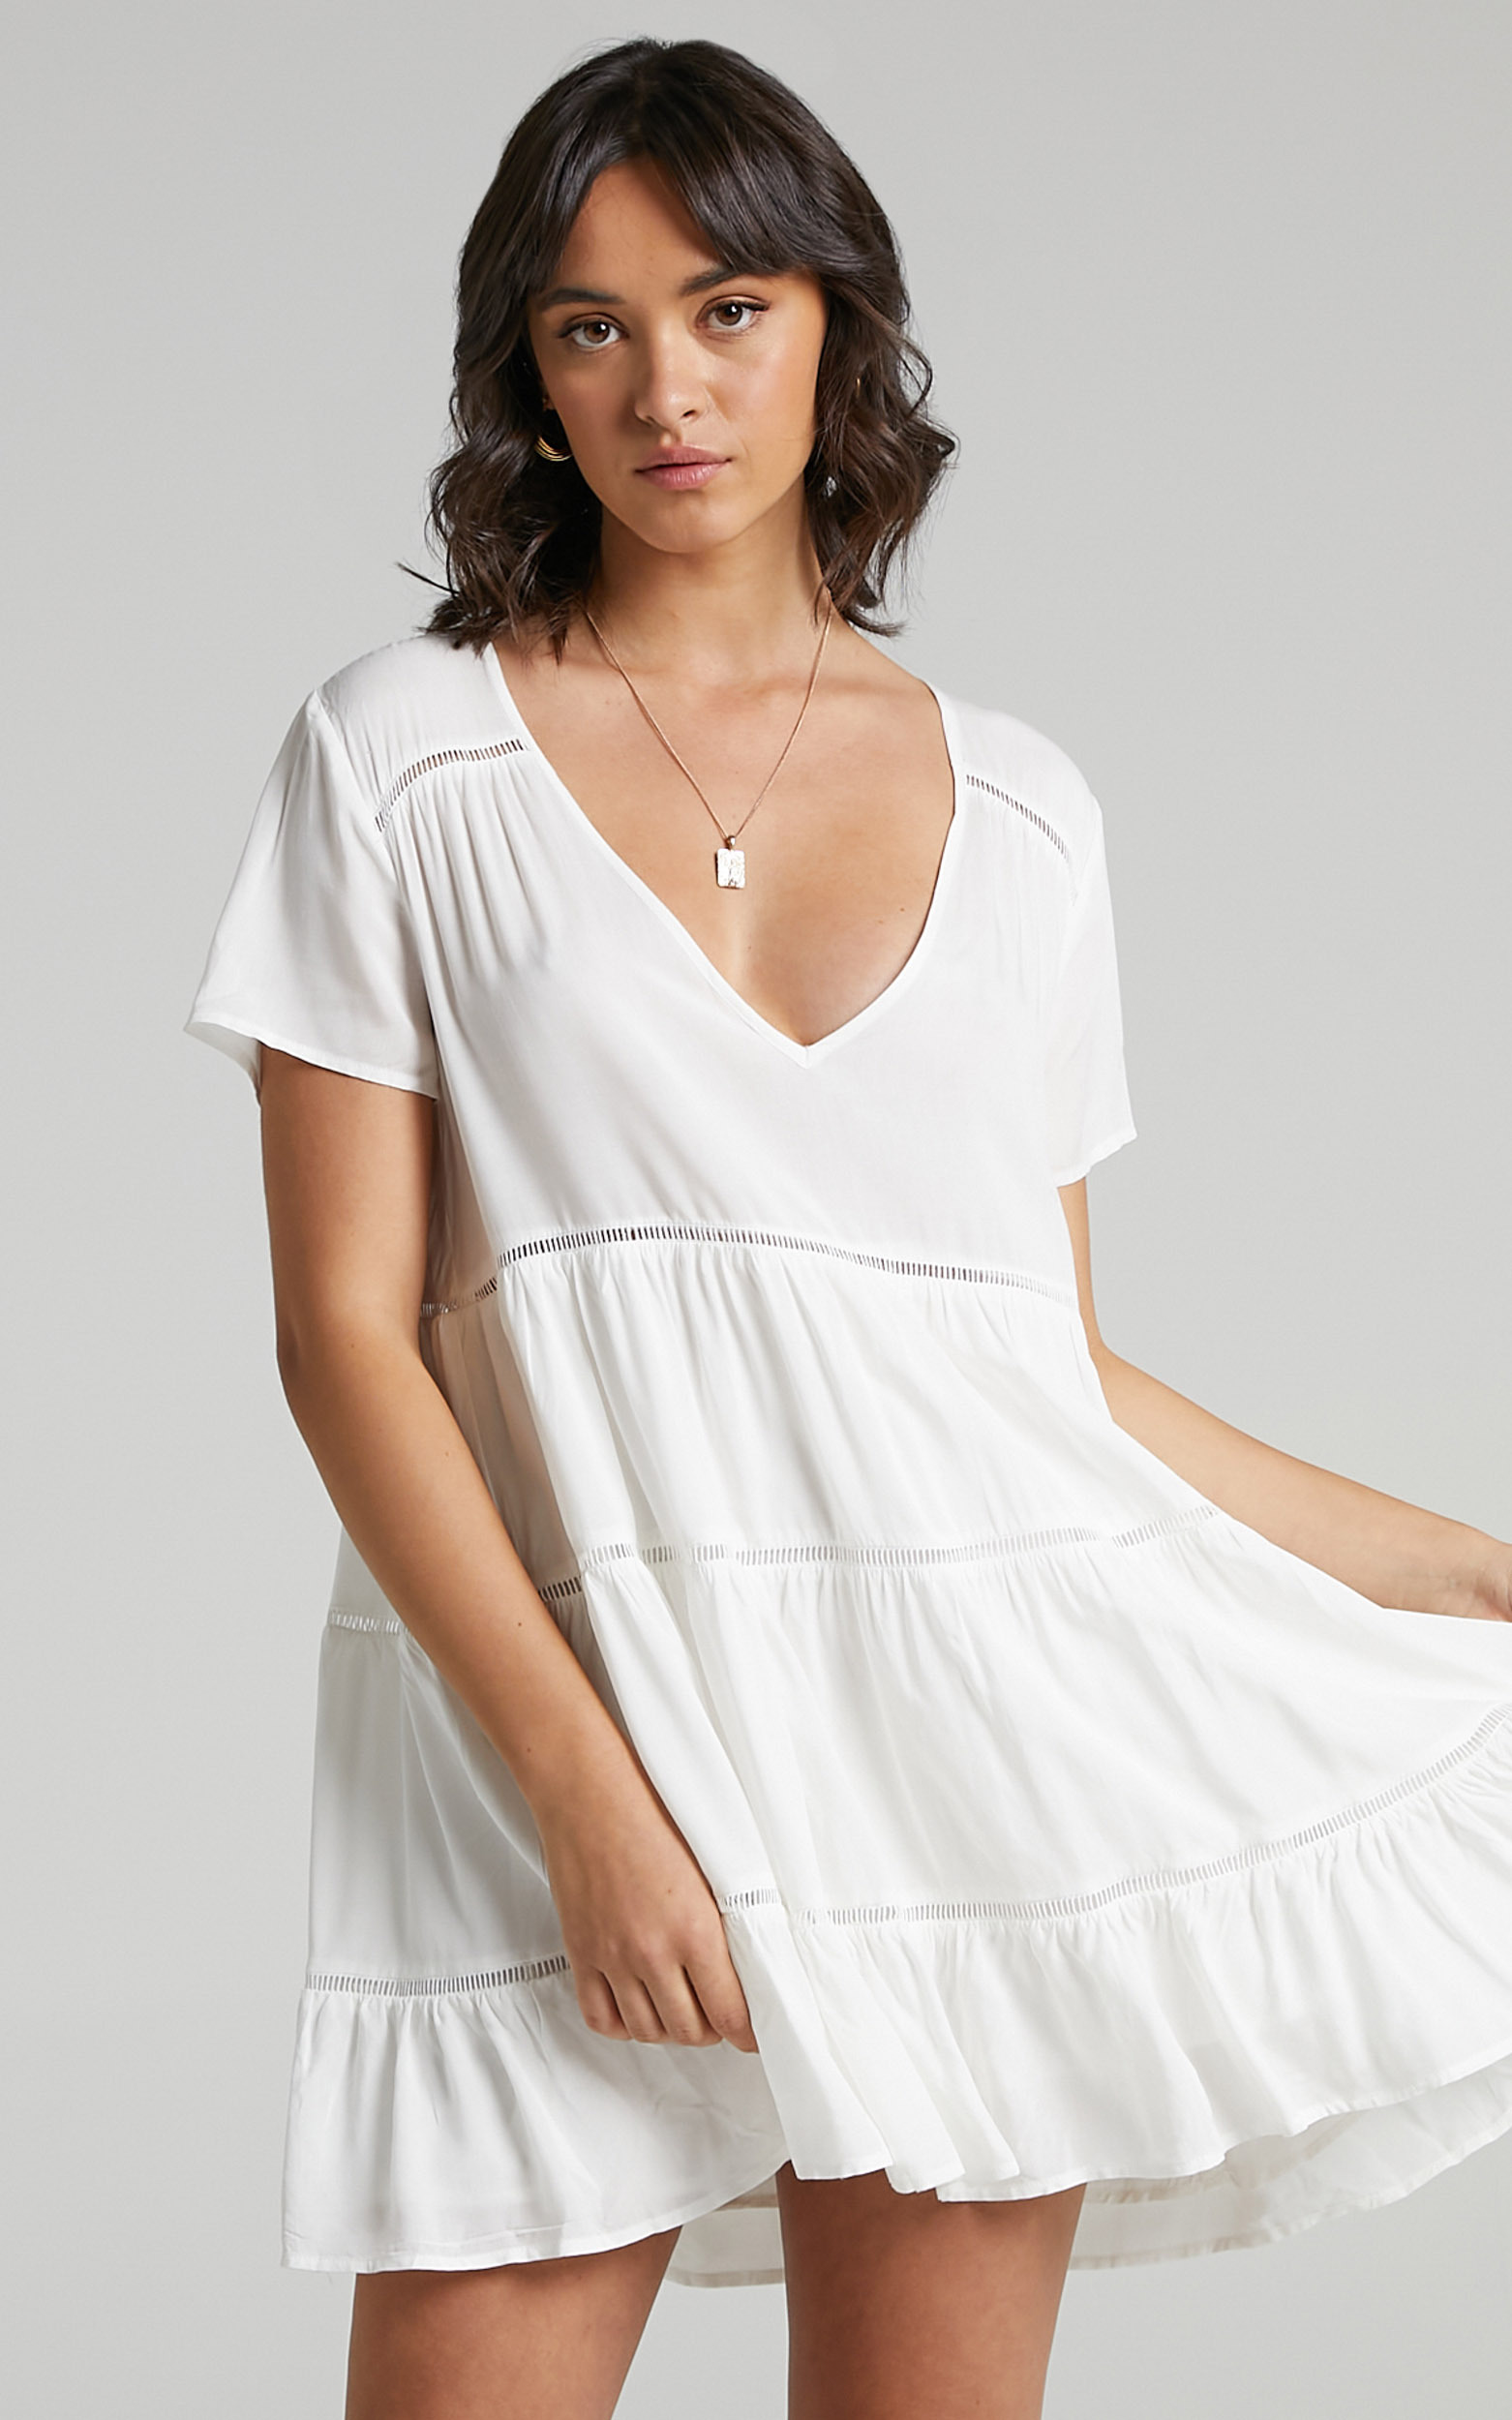 Penryn Dress in White - 06, WHT1, hi-res image number null